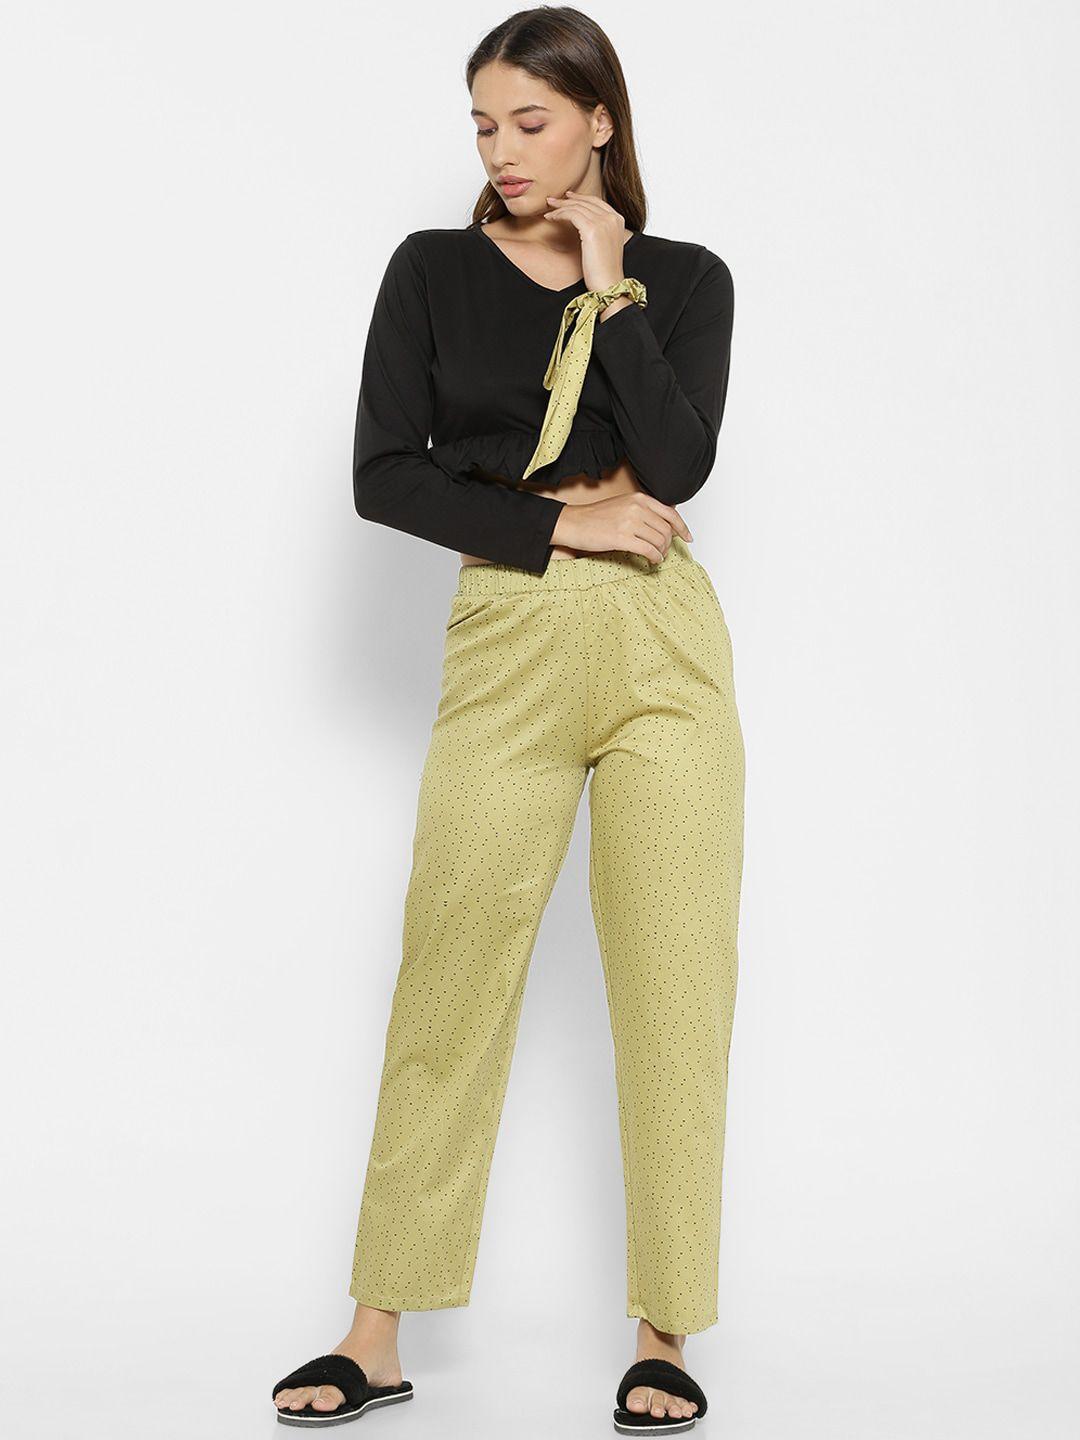 FOREVER 21 Women Green & Black Pure Cotton Night suit